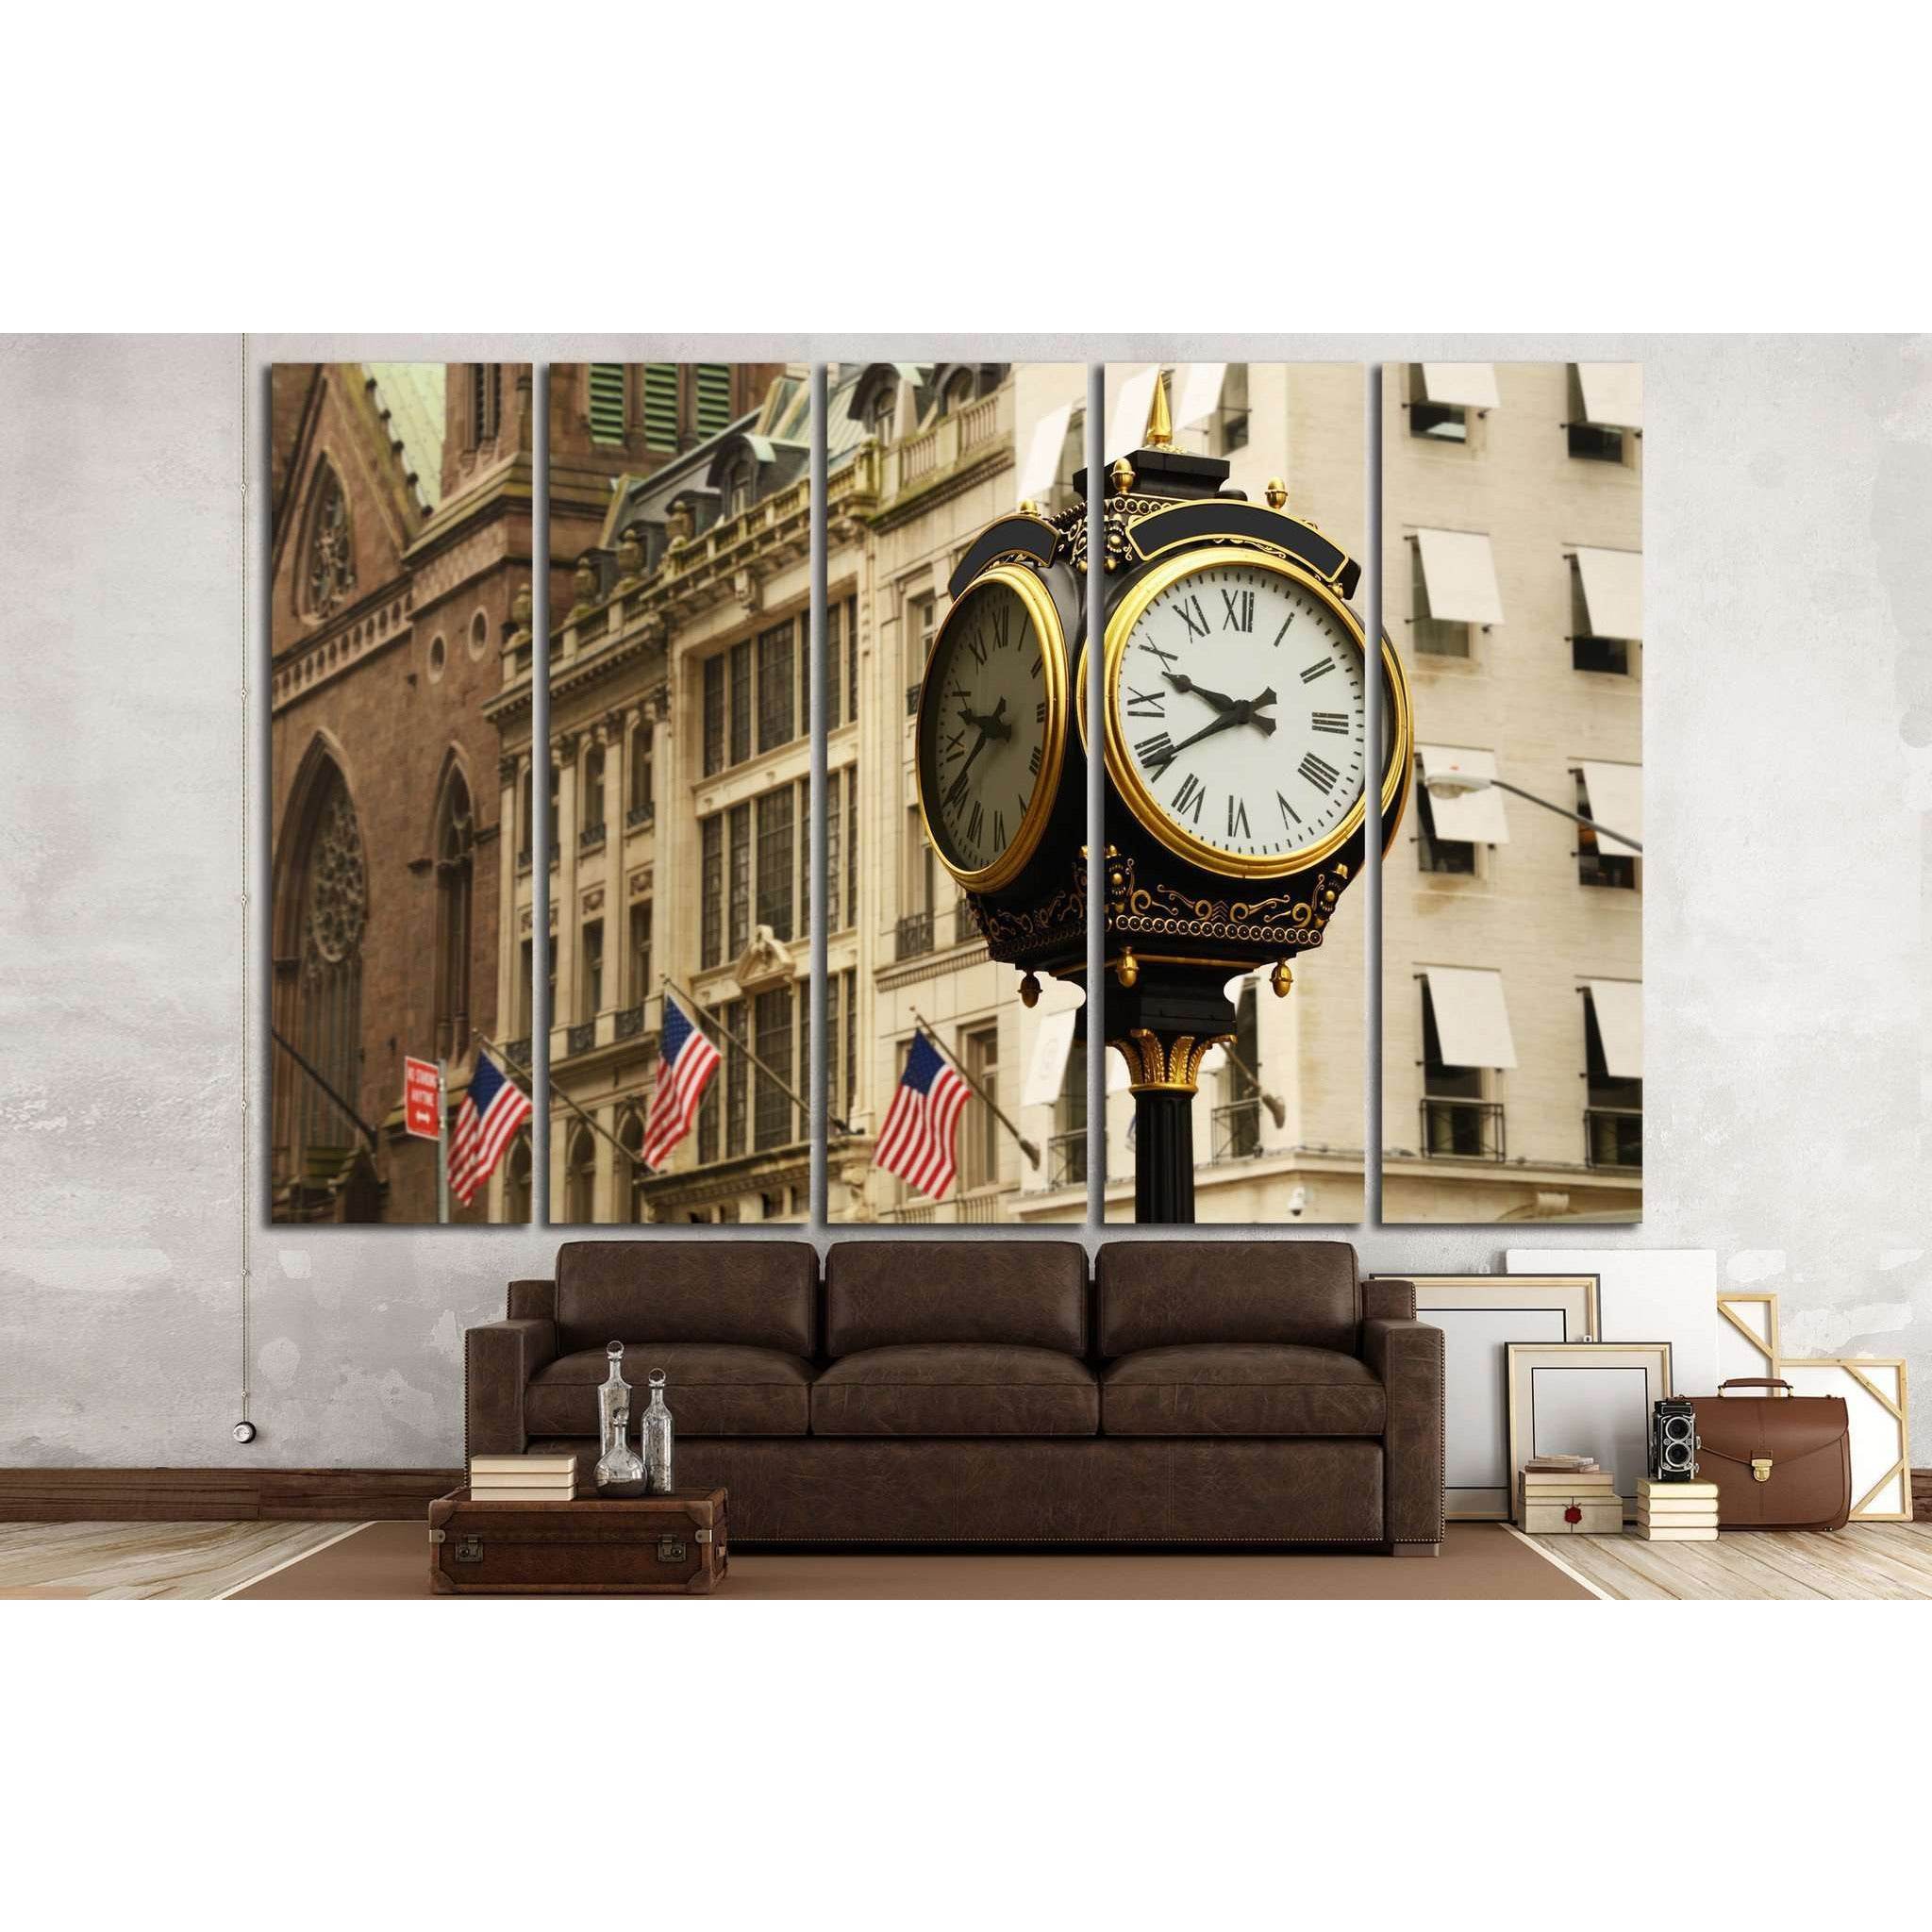 old clock, new york №864 Ready to Hang Canvas Print